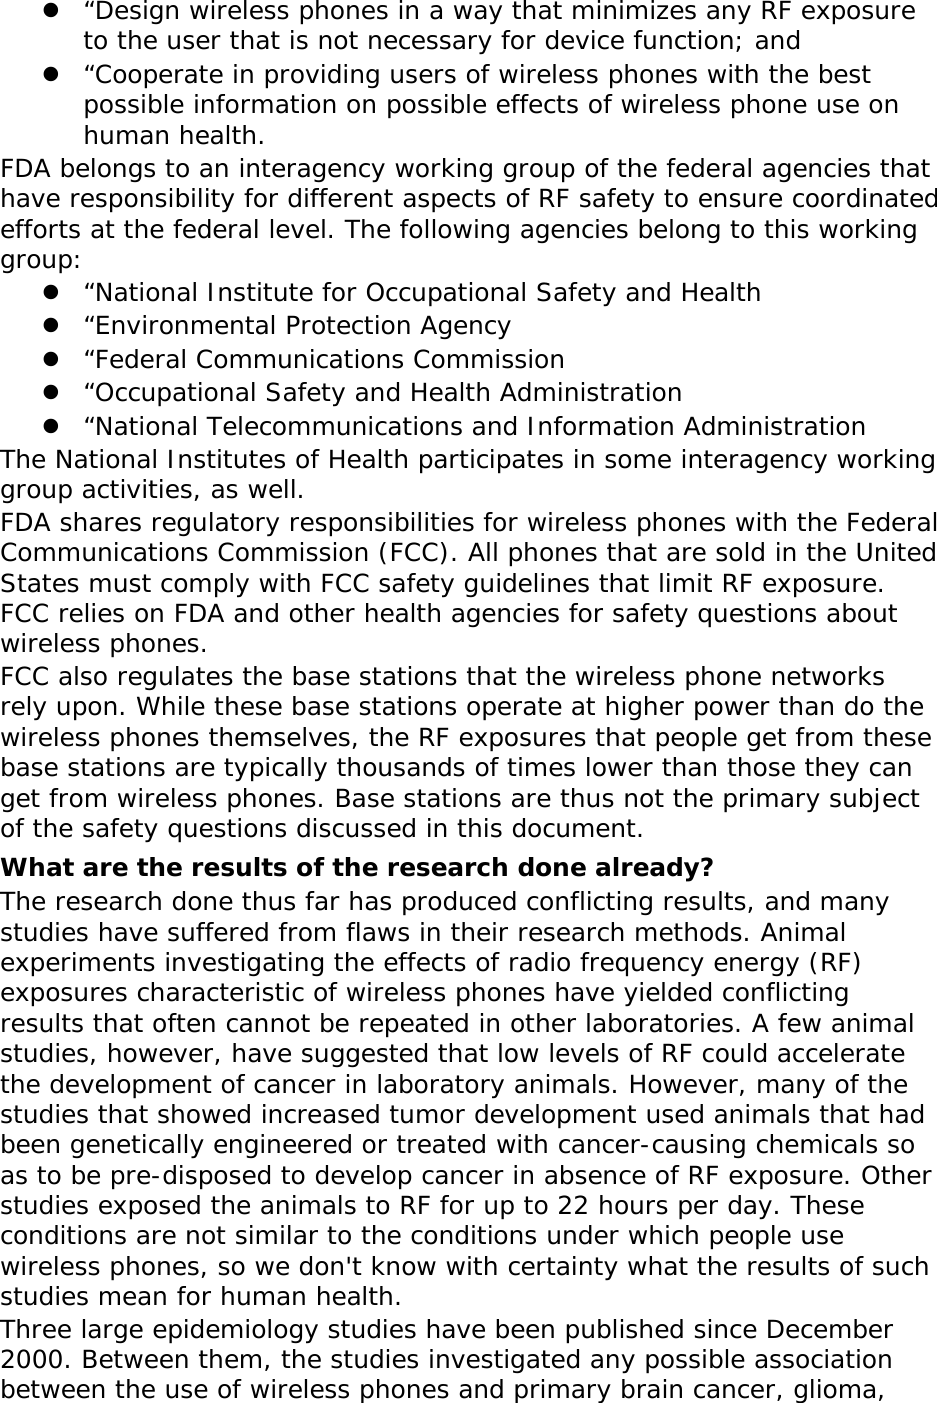  “Design wireless phones in a way that minimizes any RF exposure to the user that is not necessary for device function; and  “Cooperate in providing users of wireless phones with the best possible information on possible effects of wireless phone use on human health. FDA belongs to an interagency working group of the federal agencies that have responsibility for different aspects of RF safety to ensure coordinated efforts at the federal level. The following agencies belong to this working group:  “National Institute for Occupational Safety and Health  “Environmental Protection Agency  “Federal Communications Commission  “Occupational Safety and Health Administration  “National Telecommunications and Information Administration The National Institutes of Health participates in some interagency working group activities, as well. FDA shares regulatory responsibilities for wireless phones with the Federal Communications Commission (FCC). All phones that are sold in the United States must comply with FCC safety guidelines that limit RF exposure. FCC relies on FDA and other health agencies for safety questions about wireless phones. FCC also regulates the base stations that the wireless phone networks rely upon. While these base stations operate at higher power than do the wireless phones themselves, the RF exposures that people get from these base stations are typically thousands of times lower than those they can get from wireless phones. Base stations are thus not the primary subject of the safety questions discussed in this document. What are the results of the research done already? The research done thus far has produced conflicting results, and many studies have suffered from flaws in their research methods. Animal experiments investigating the effects of radio frequency energy (RF) exposures characteristic of wireless phones have yielded conflicting results that often cannot be repeated in other laboratories. A few animal studies, however, have suggested that low levels of RF could accelerate the development of cancer in laboratory animals. However, many of the studies that showed increased tumor development used animals that had been genetically engineered or treated with cancer-causing chemicals so as to be pre-disposed to develop cancer in absence of RF exposure. Other studies exposed the animals to RF for up to 22 hours per day. These conditions are not similar to the conditions under which people use wireless phones, so we don&apos;t know with certainty what the results of such studies mean for human health. Three large epidemiology studies have been published since December 2000. Between them, the studies investigated any possible association between the use of wireless phones and primary brain cancer, glioma, 